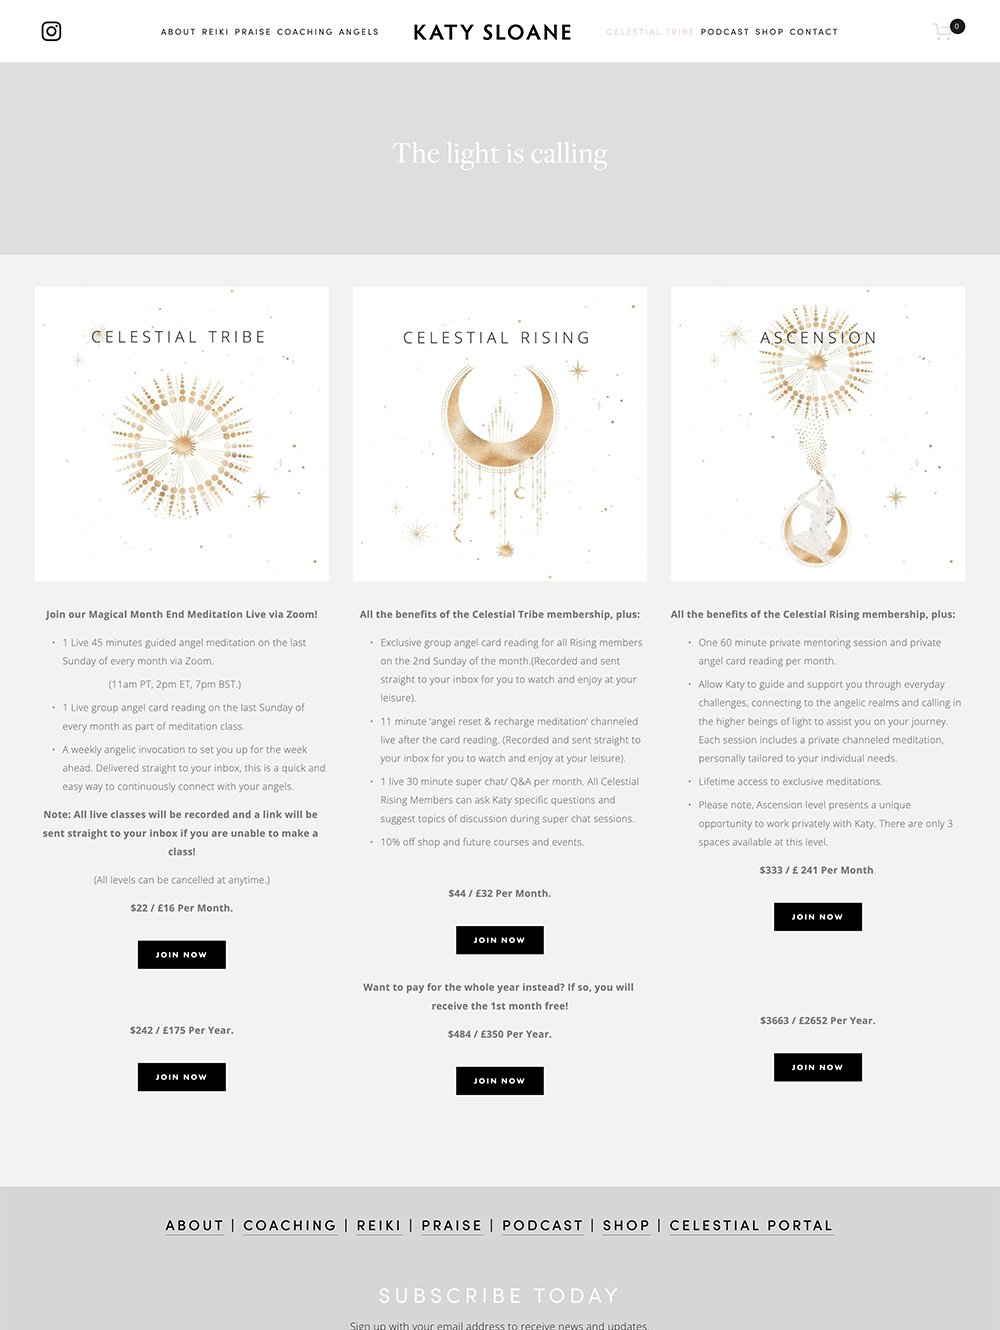 expert brand and website design helping ambitious women in business attract their dream clients